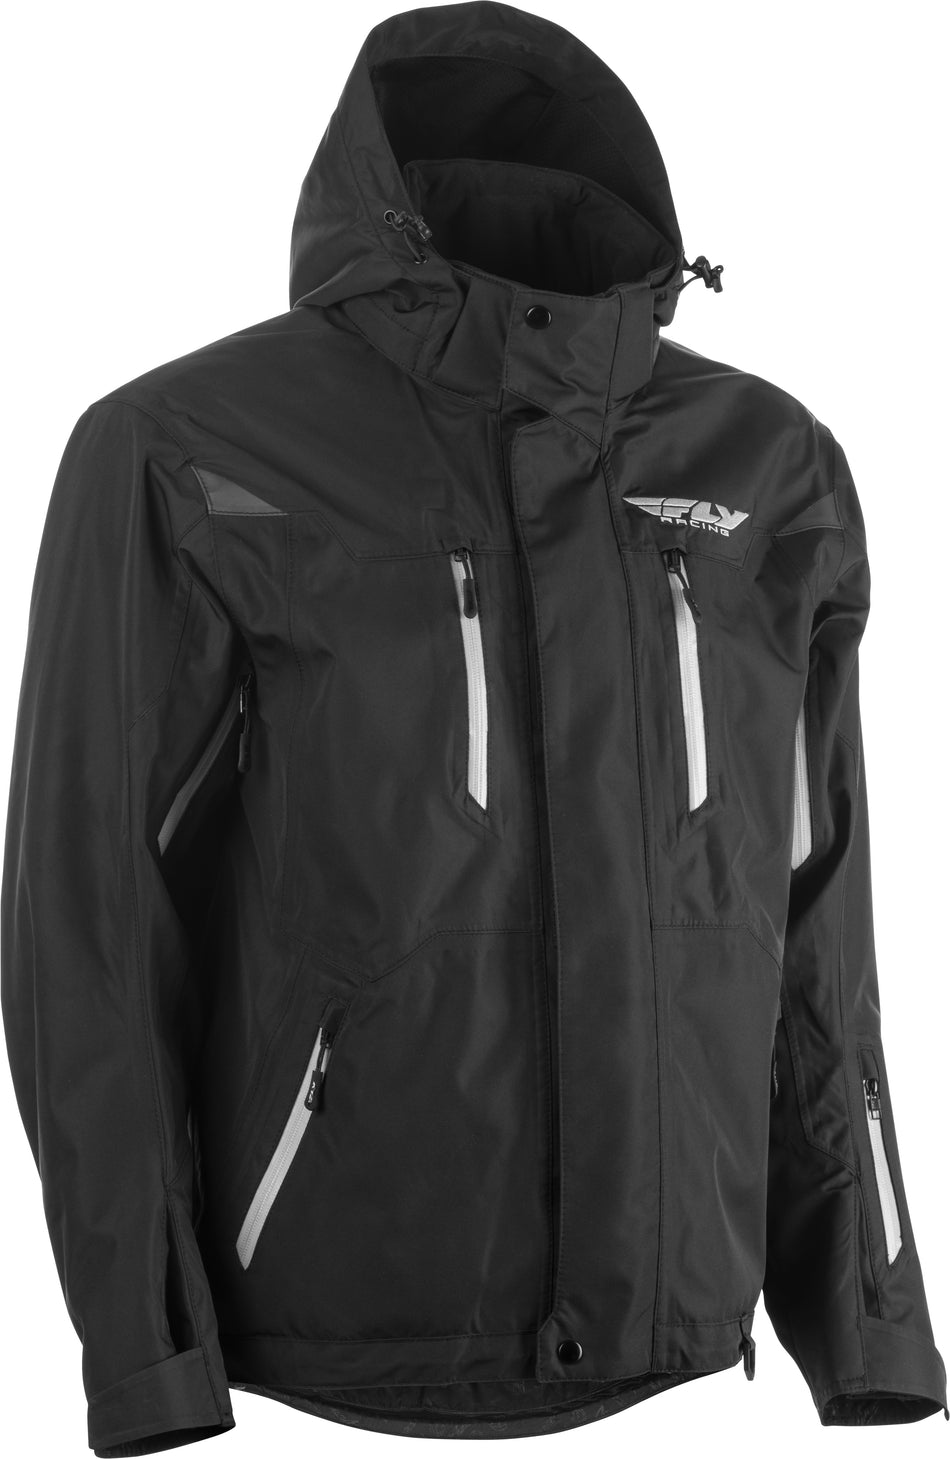 FLY RACING Fly Incline Jacket Black 2x 470-41002X